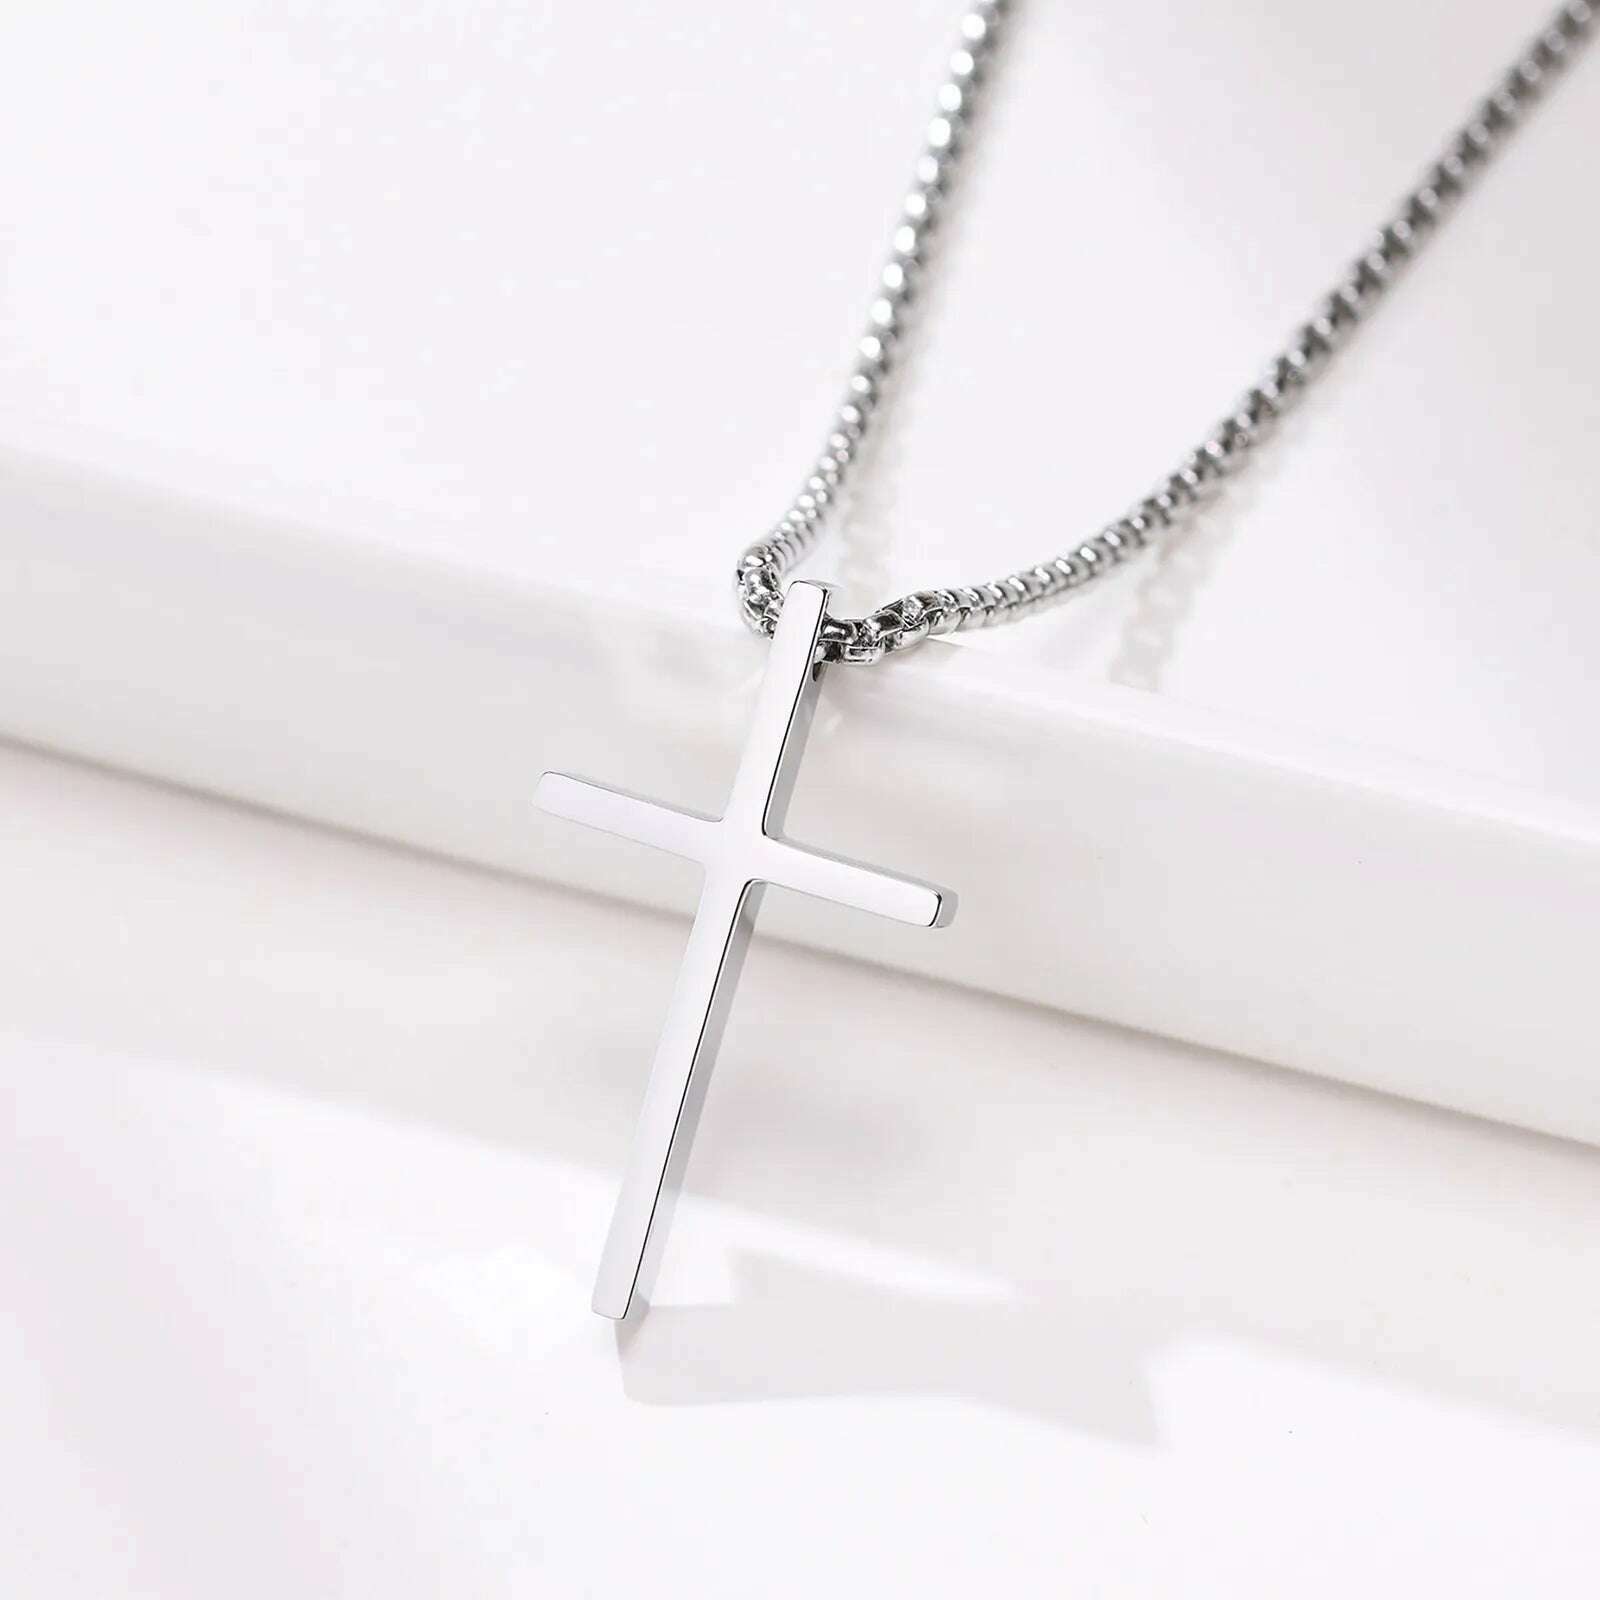 KIMLUD, Vnox Mens Cross Necklaces, Stainless Steel Layered Plain Cross Pendant, Rope Box Chain Necklace, Simple Prayer Jesus Collar, NC-1035S, KIMLUD Womens Clothes